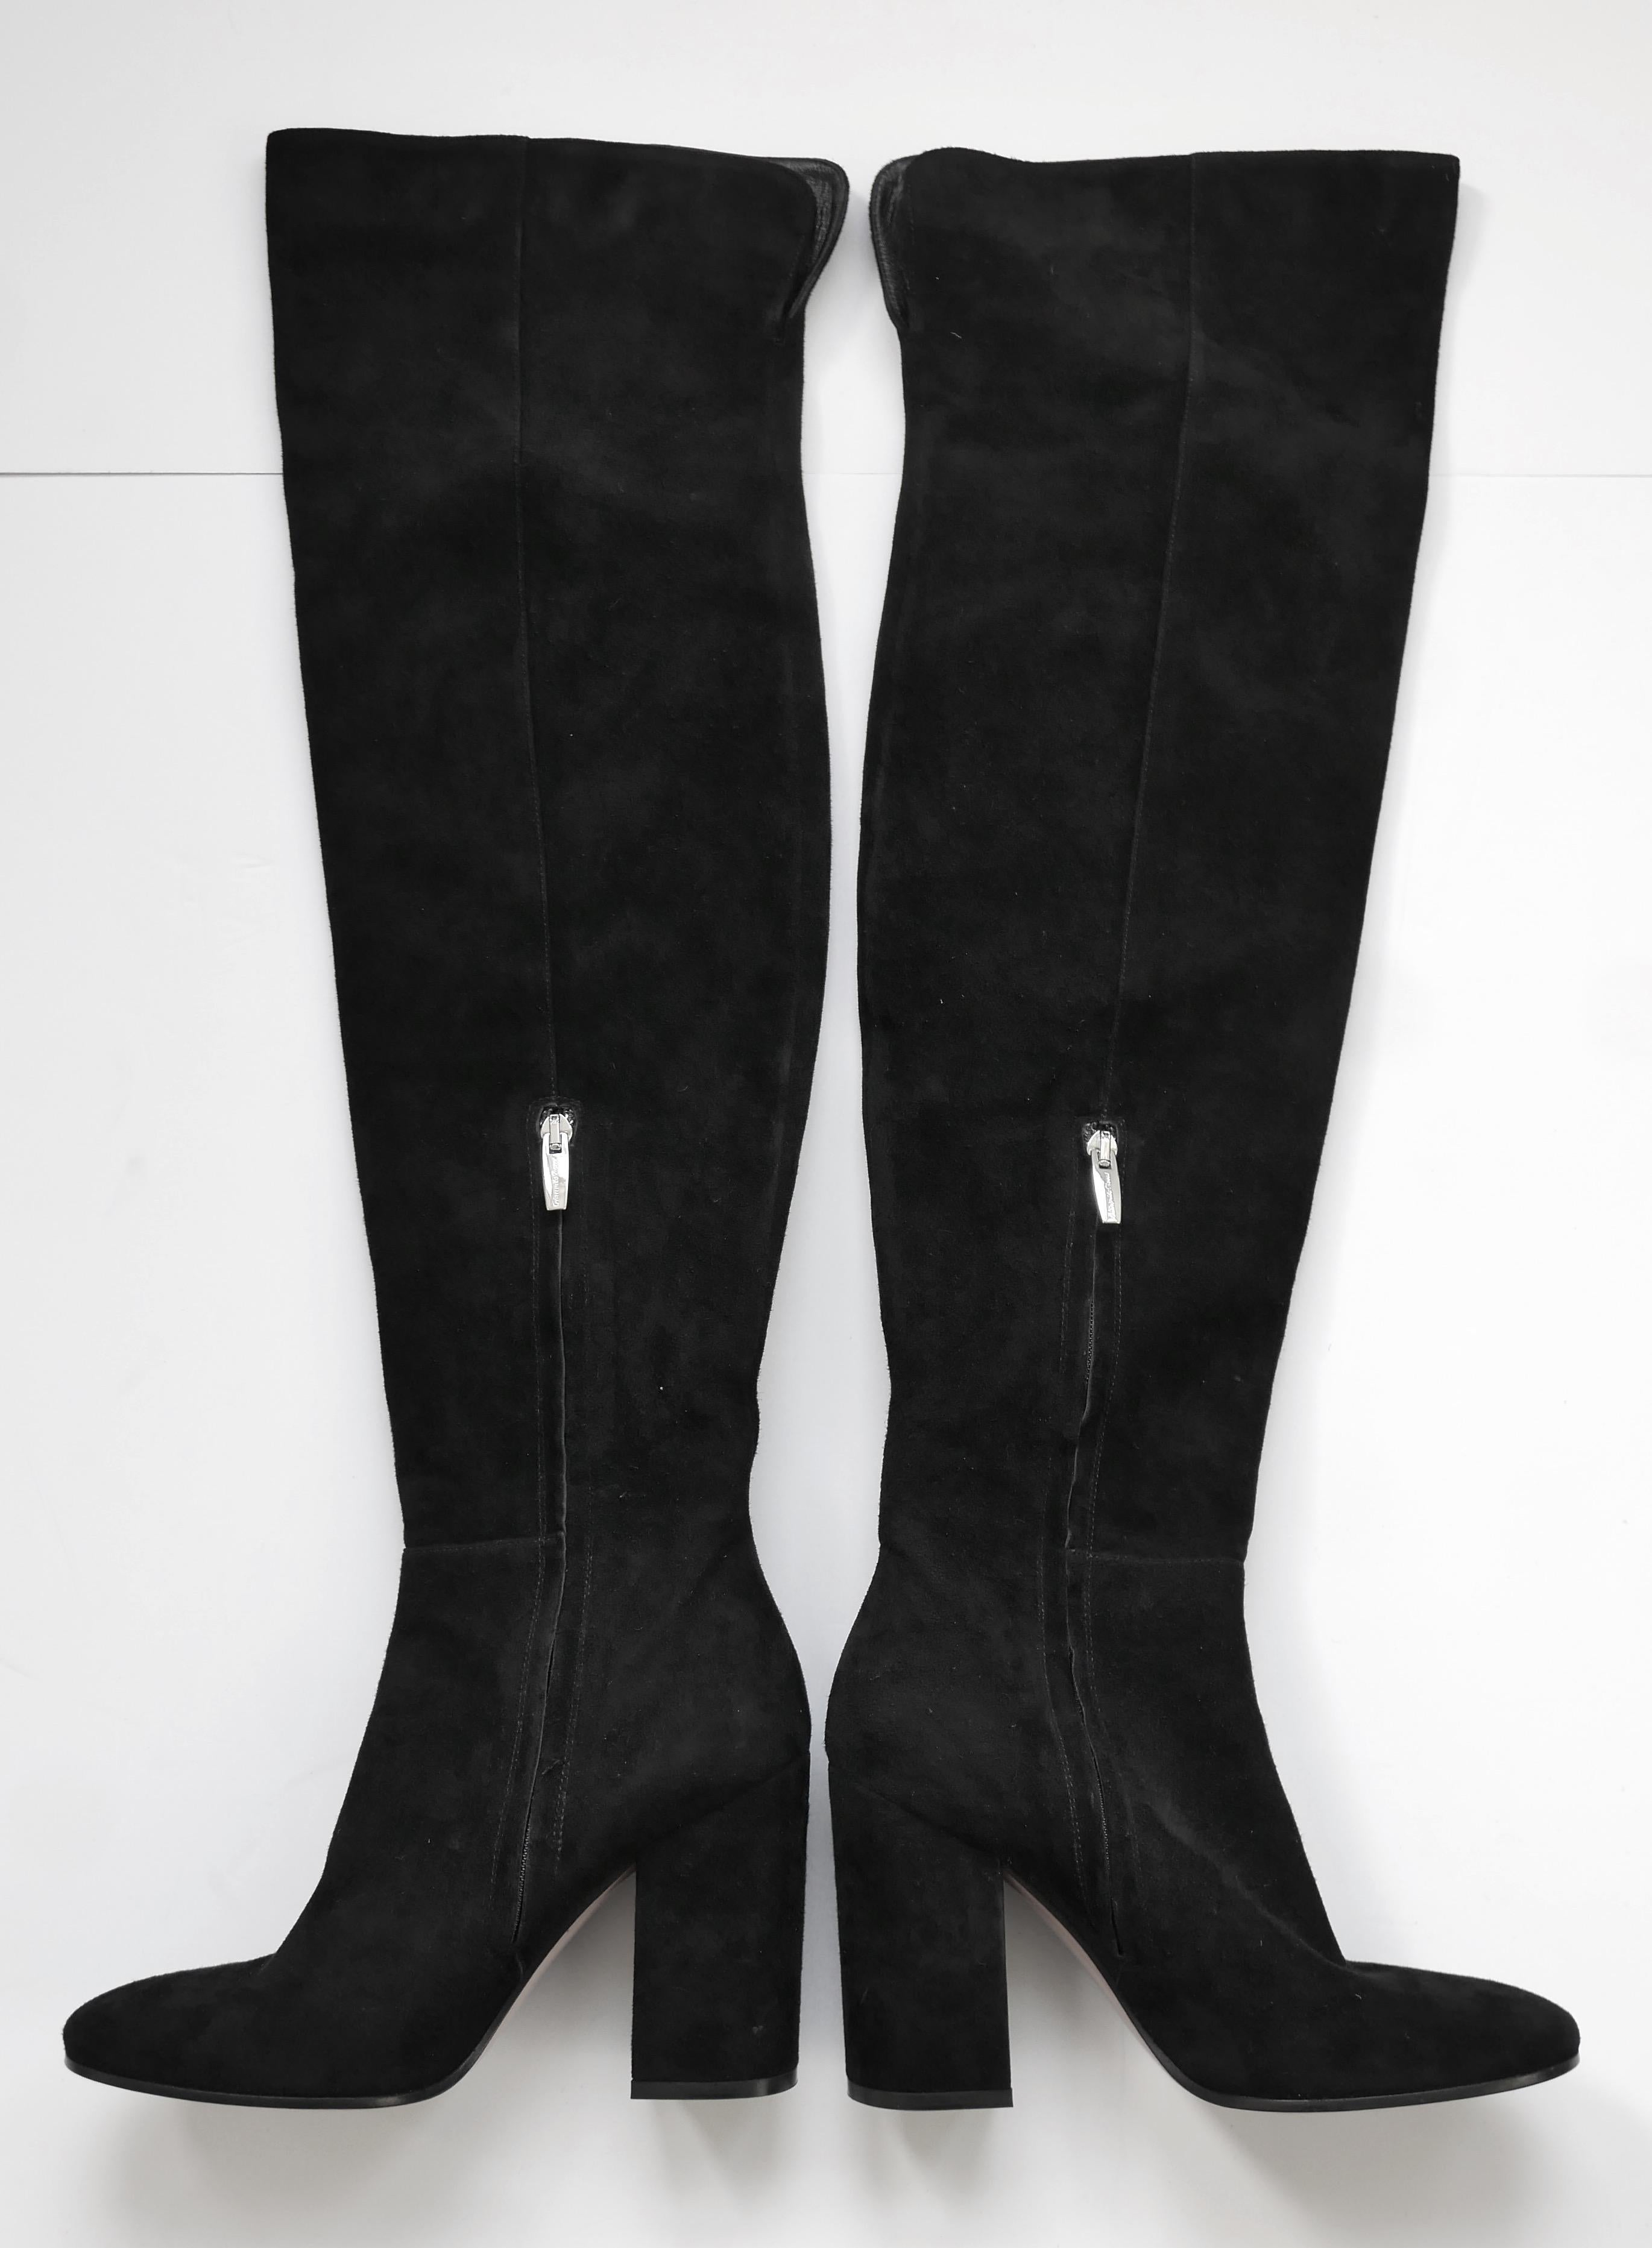 Gianvito Rossi Black Suede Over The Knee Boots In Excellent Condition For Sale In London, GB